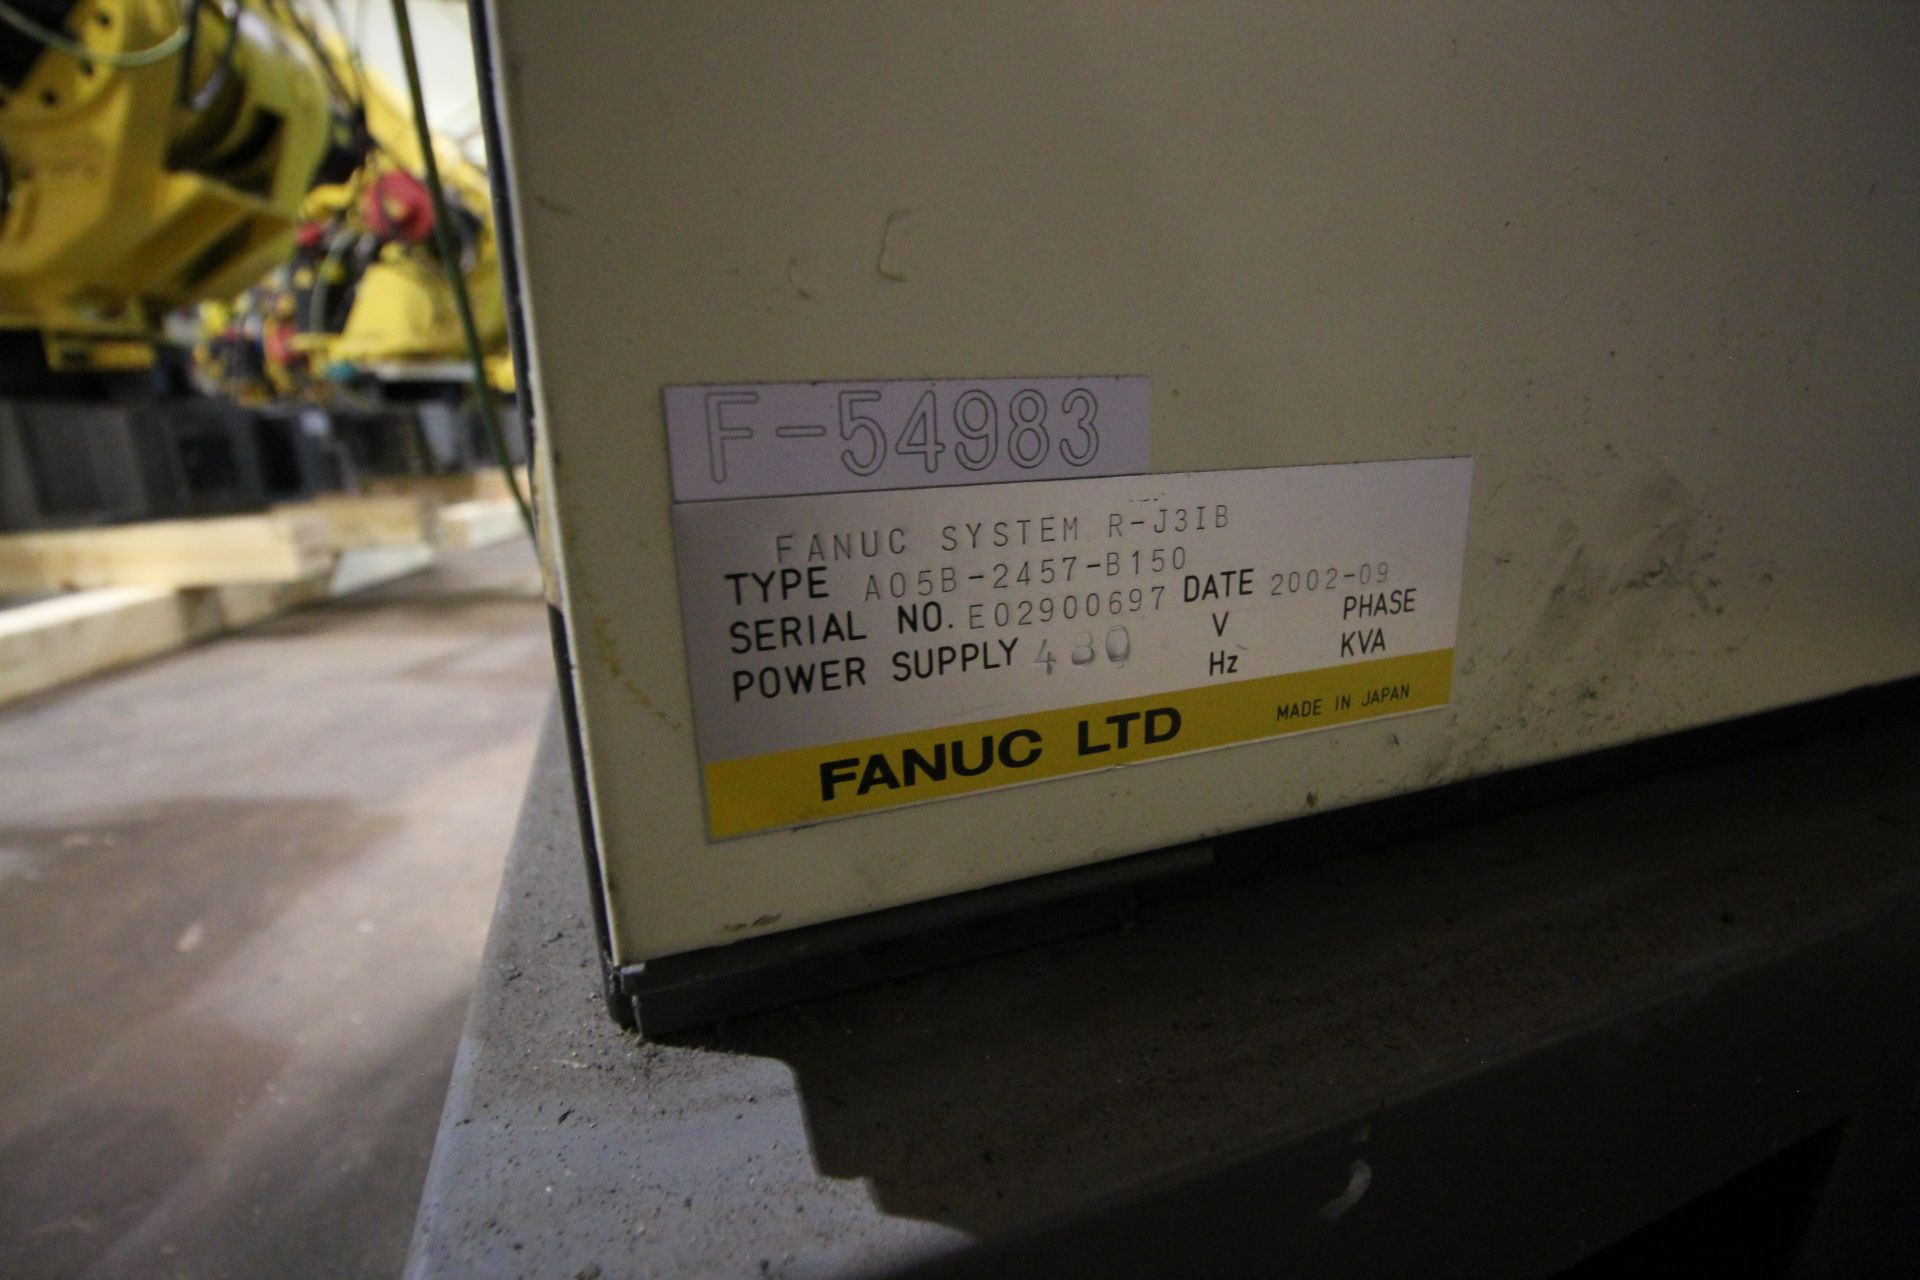 FANUC ROBOT S-500iB WITH R-J3iB CONTROLS, TEACH PENDANT & CABLES, YEAR 2002, SN 54983 - Image 6 of 7